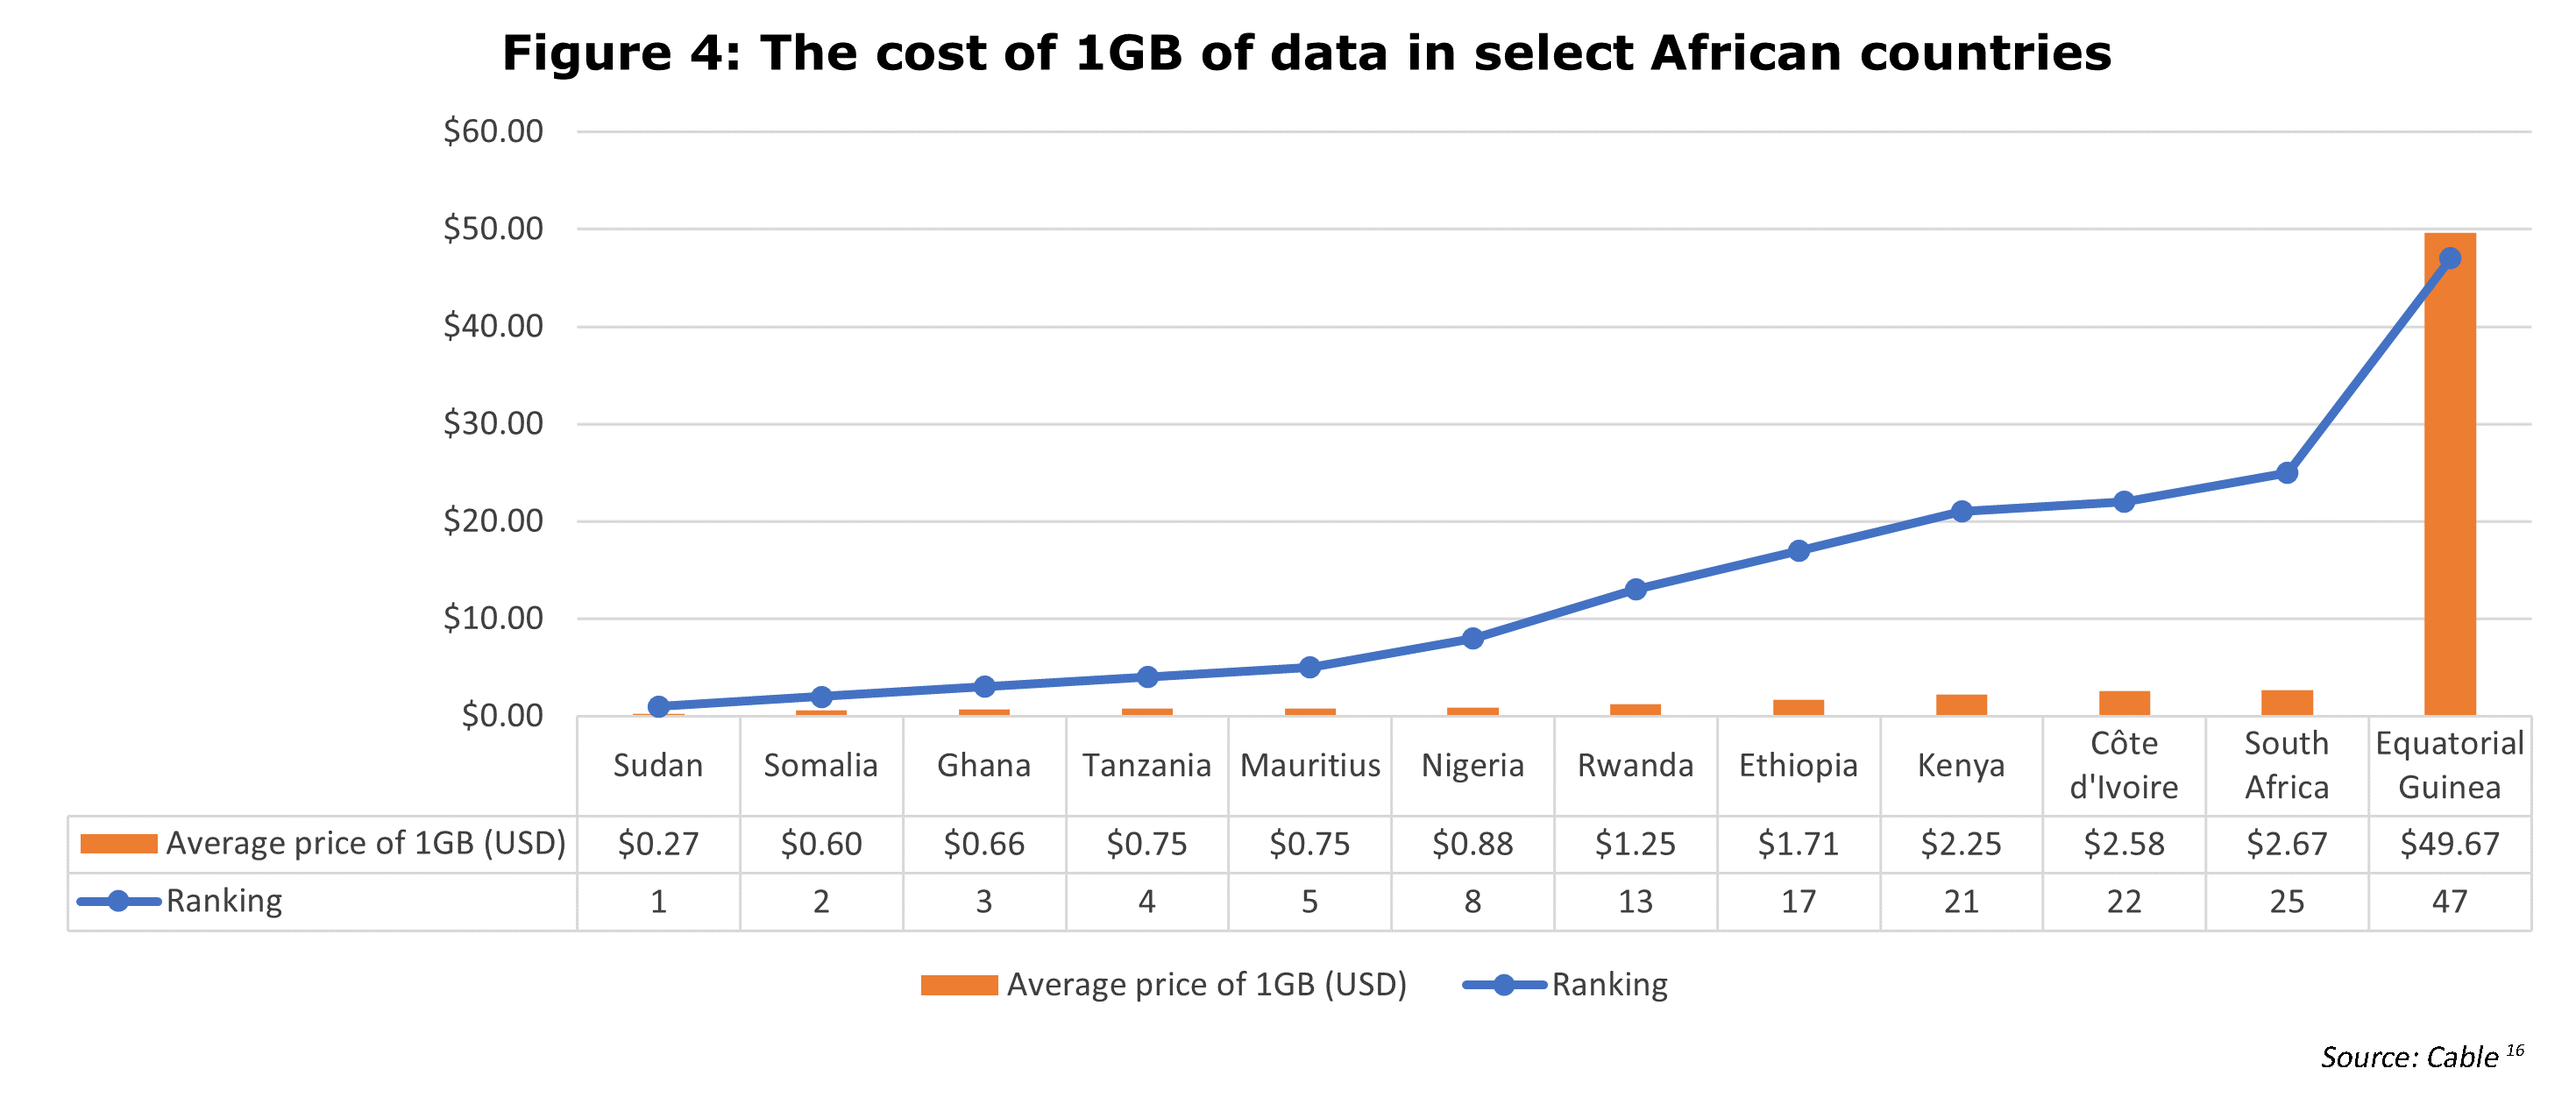 The cost of 1GB of data in select African countries